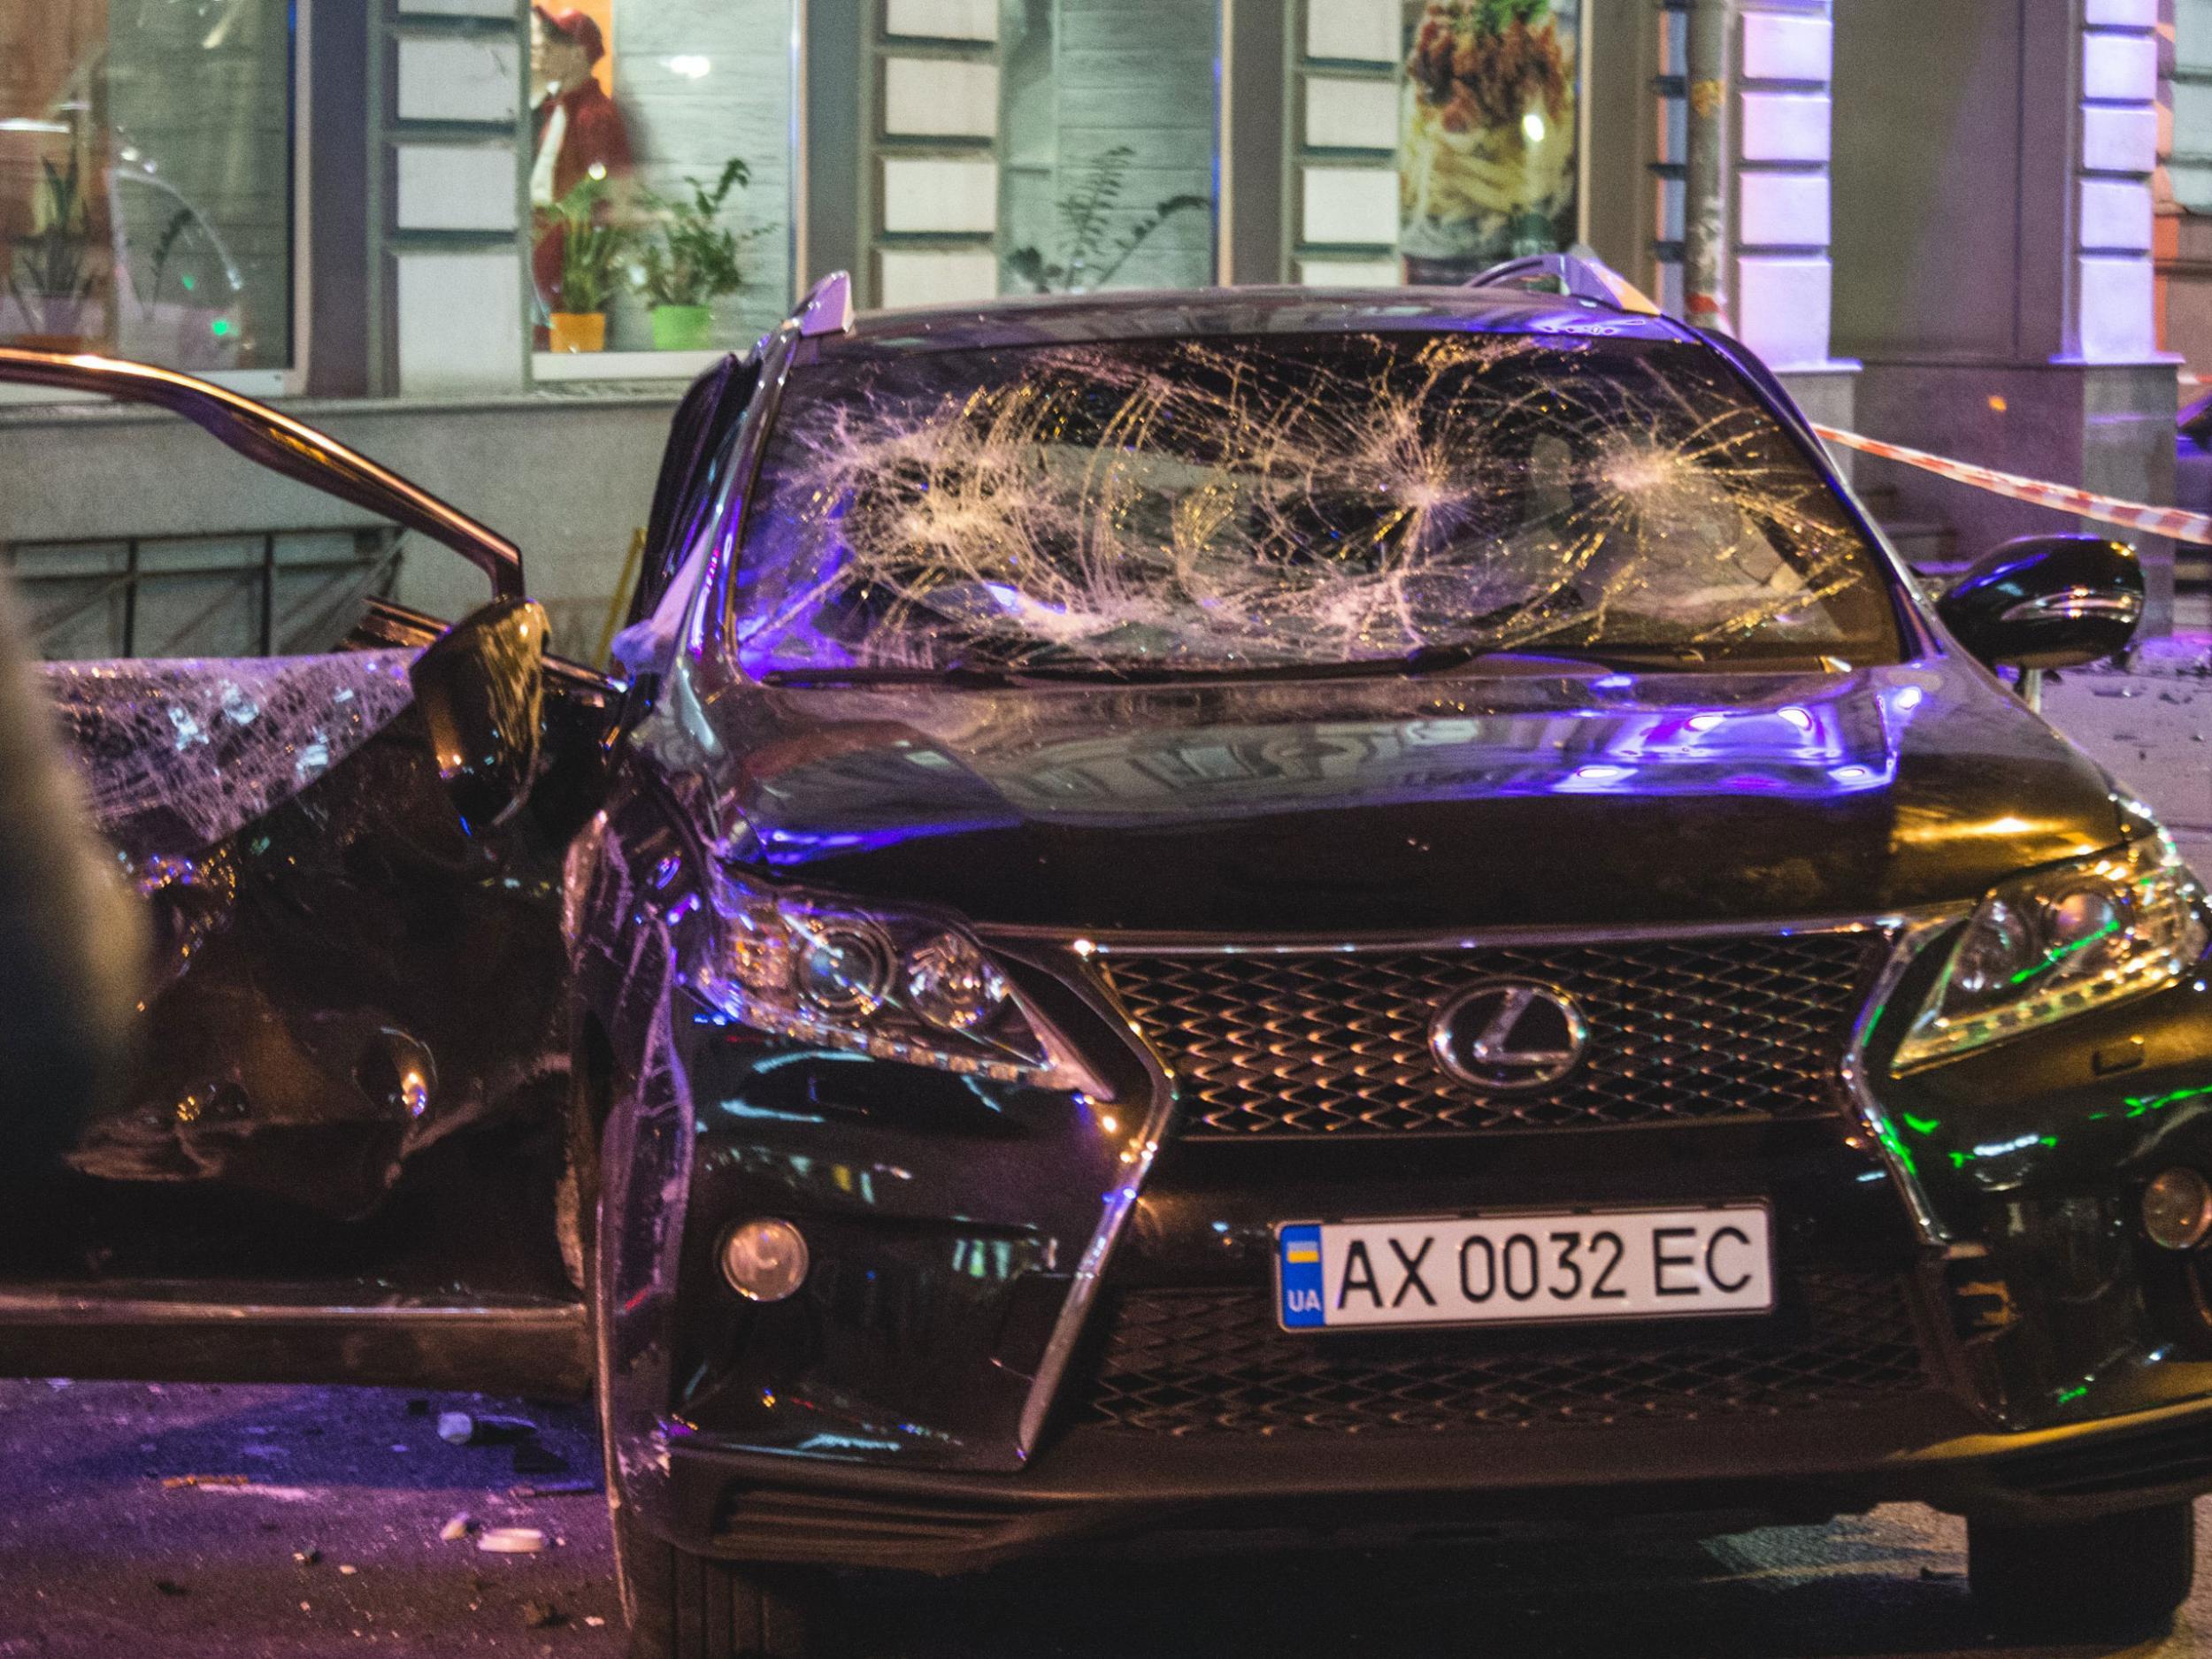 The damaged car at the scene of the road accident in Kharkiv